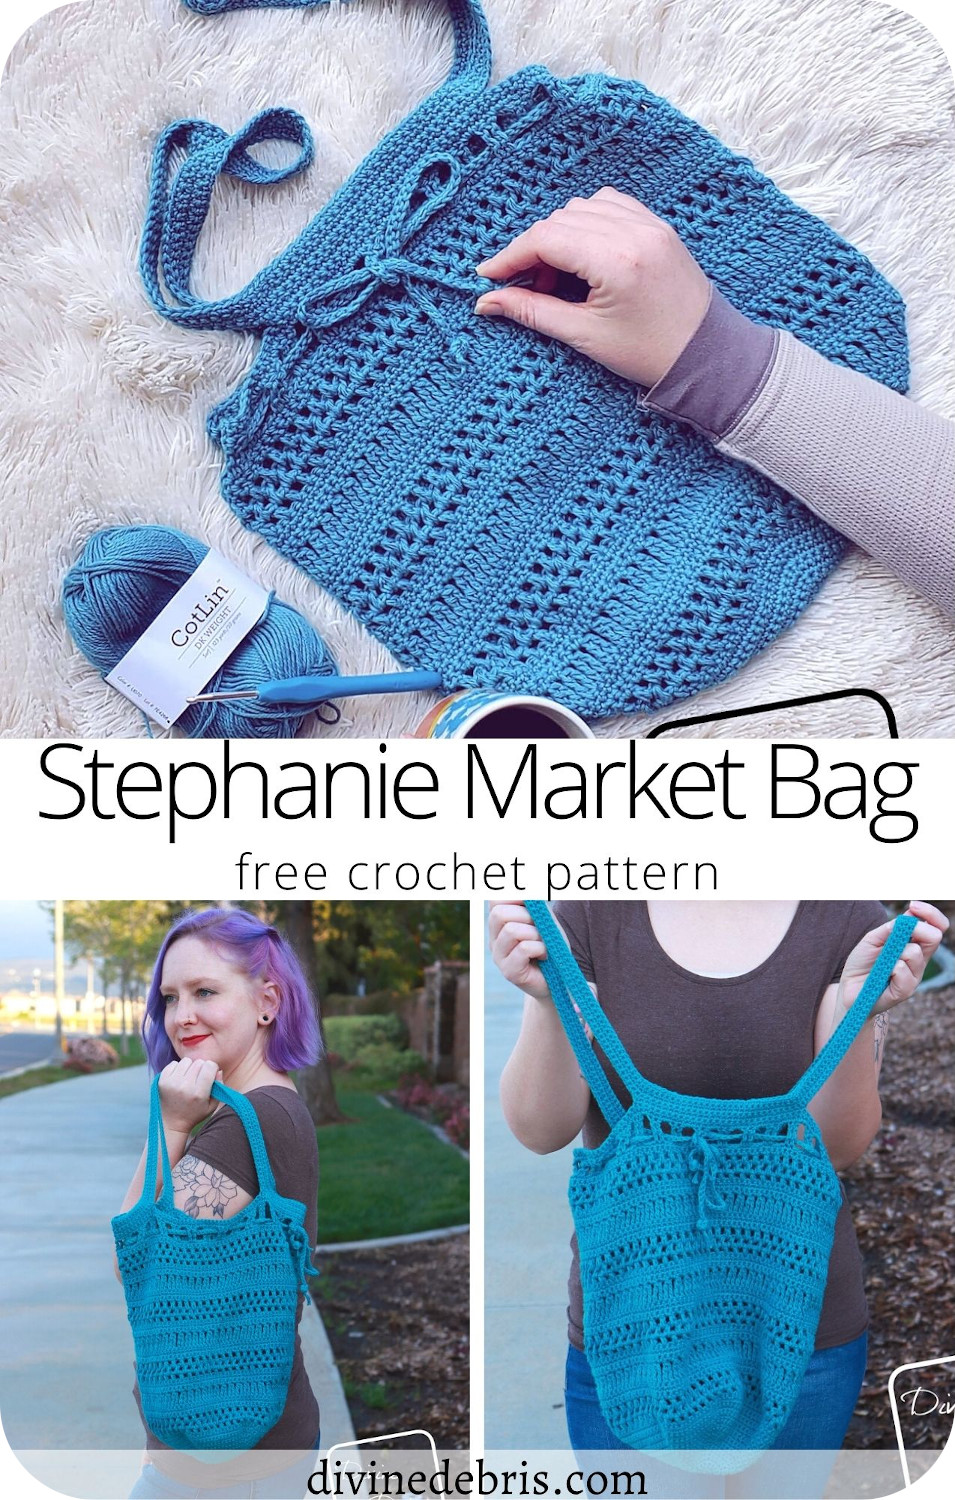 Learn to make the fun, easy, customizable, and useful Stephanie Market Bag from a free crochet pattern by DivineDebris.com